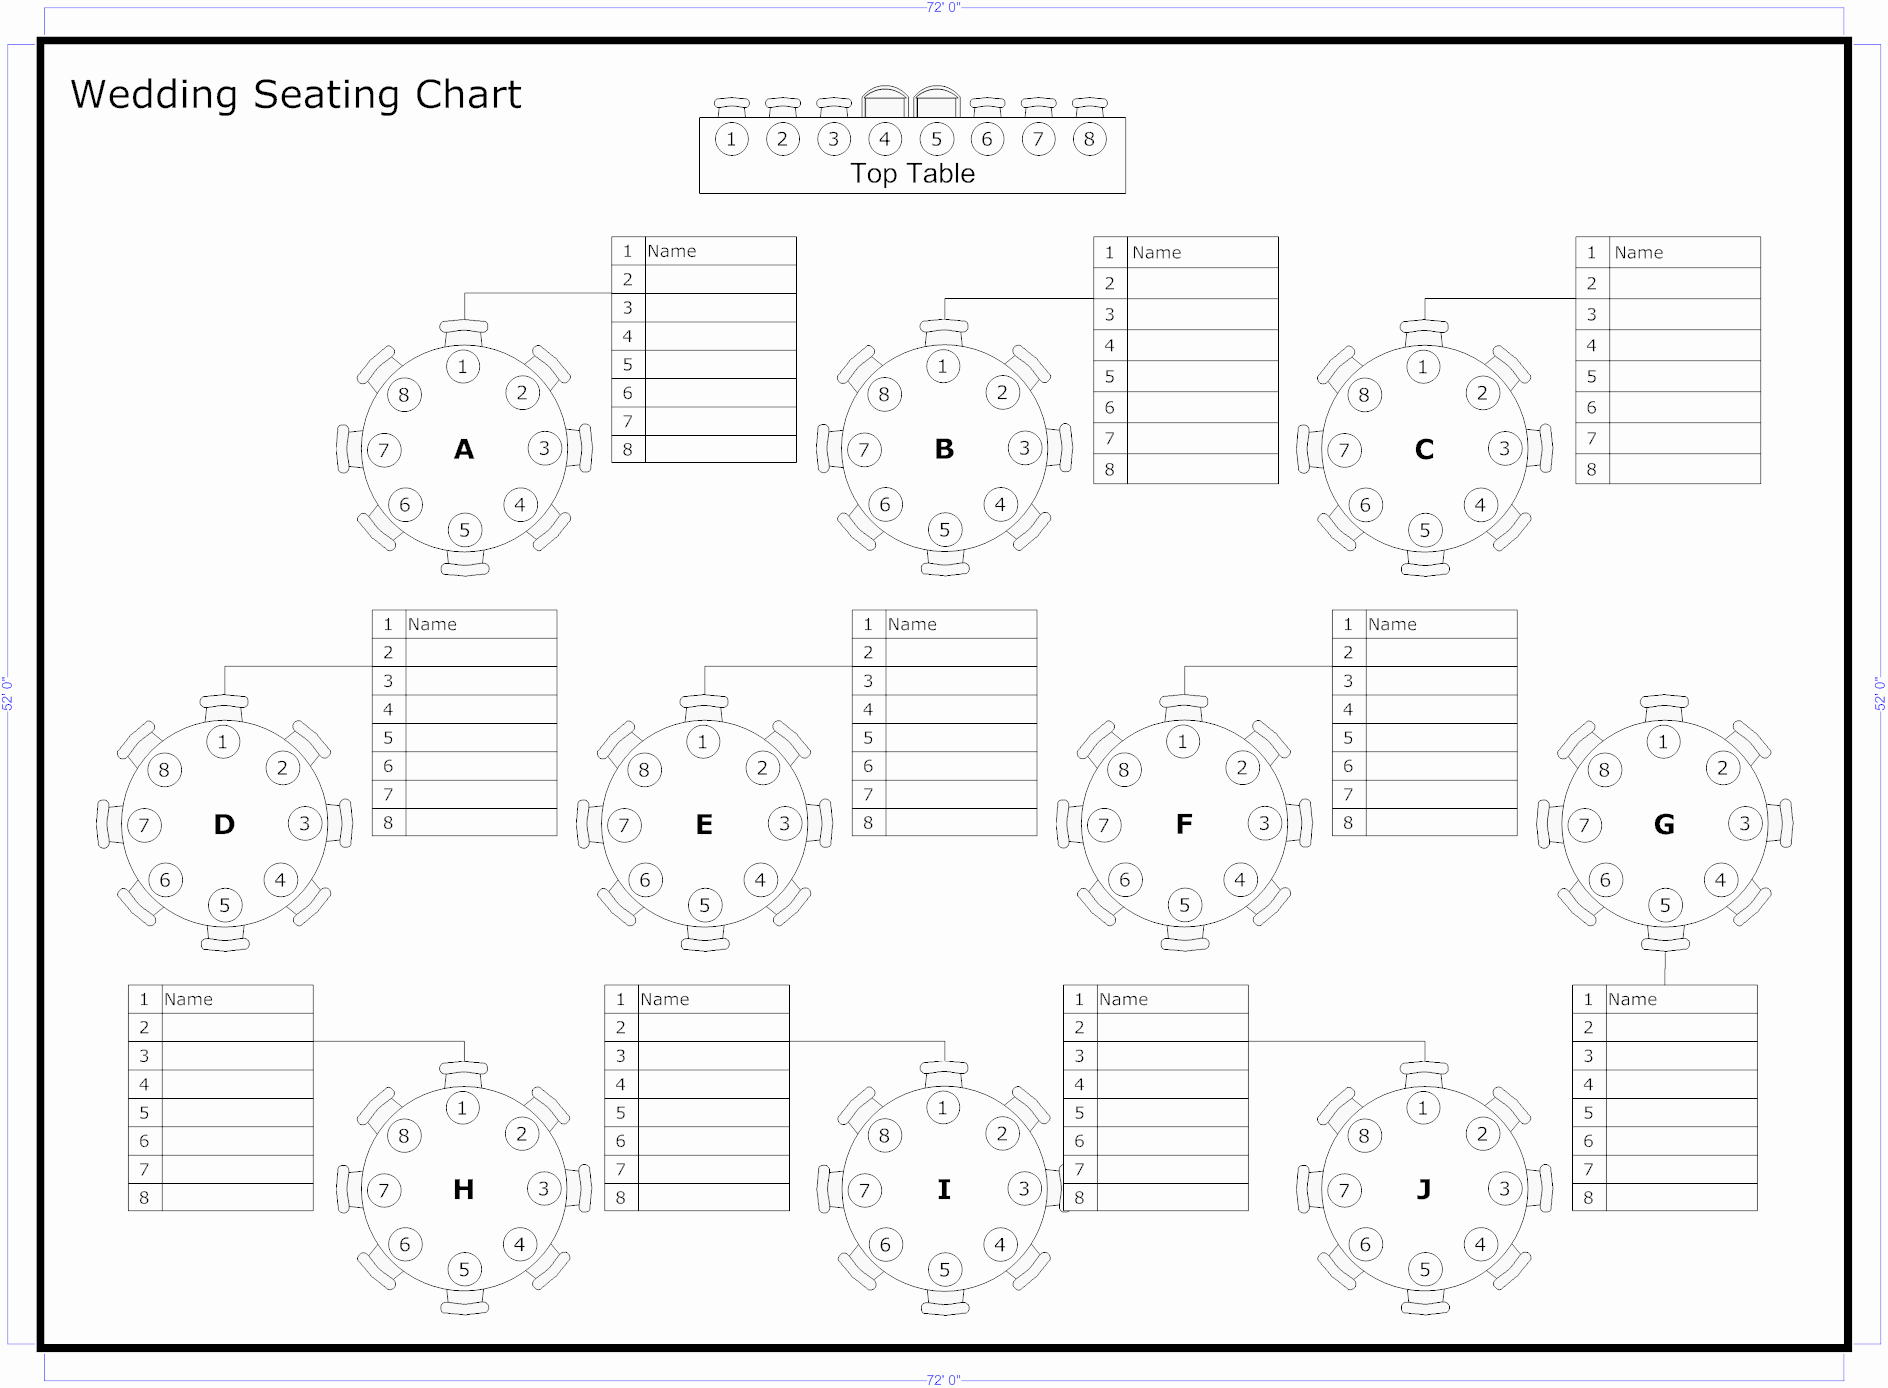 Banquet Seating Chart Template Luxury Seating Chart Make A Seating Chart Seating Chart Templates